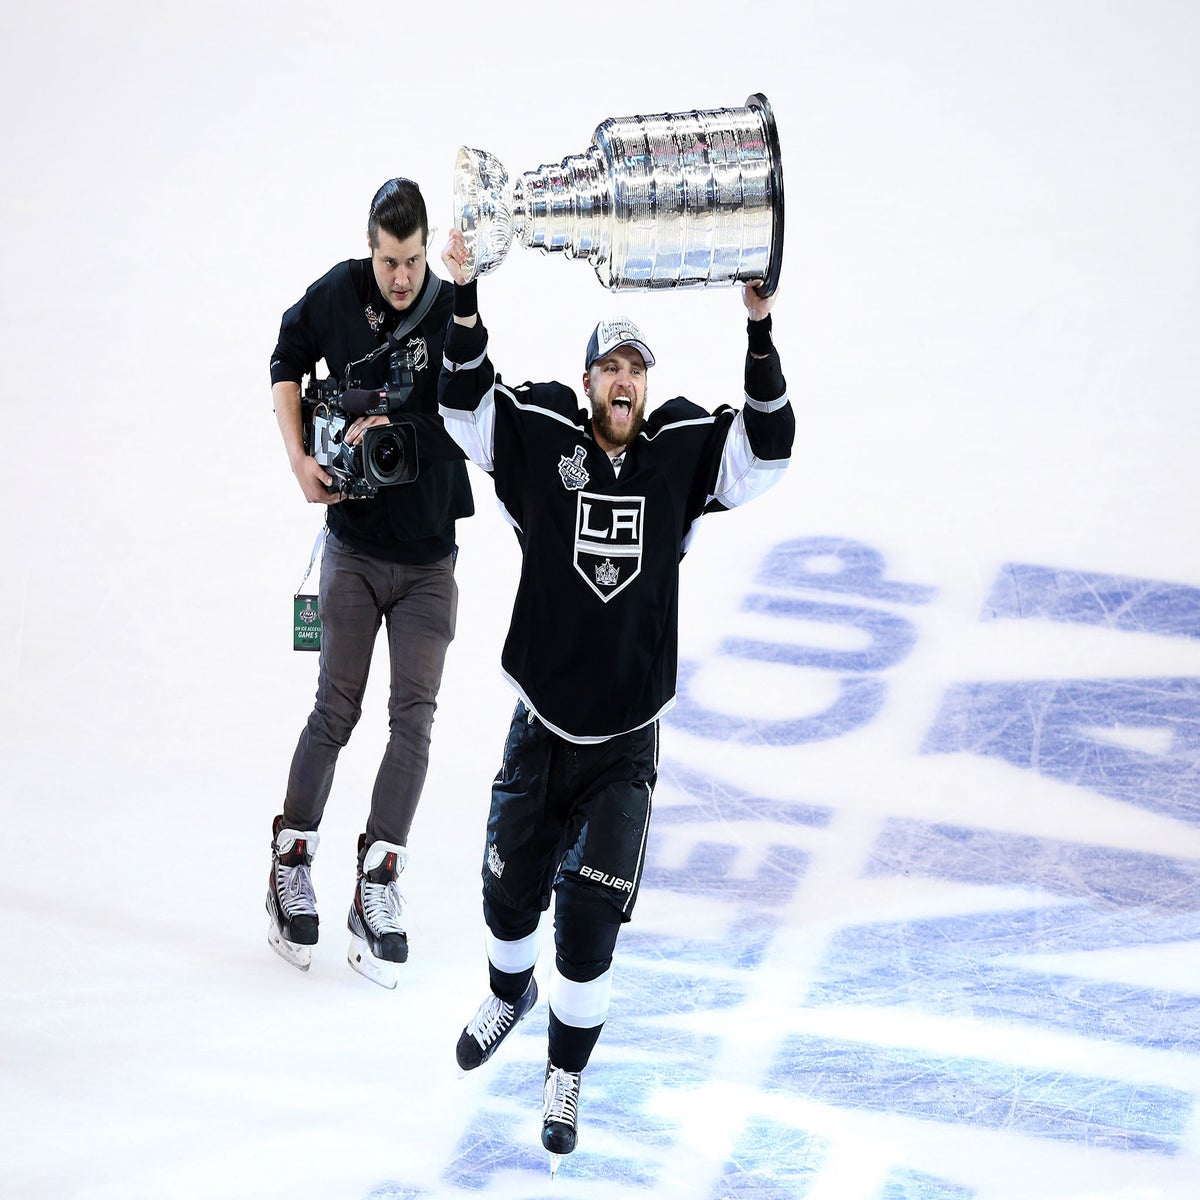 LA Kings win Stanley Cup in dramatic double OT victory over Rangers